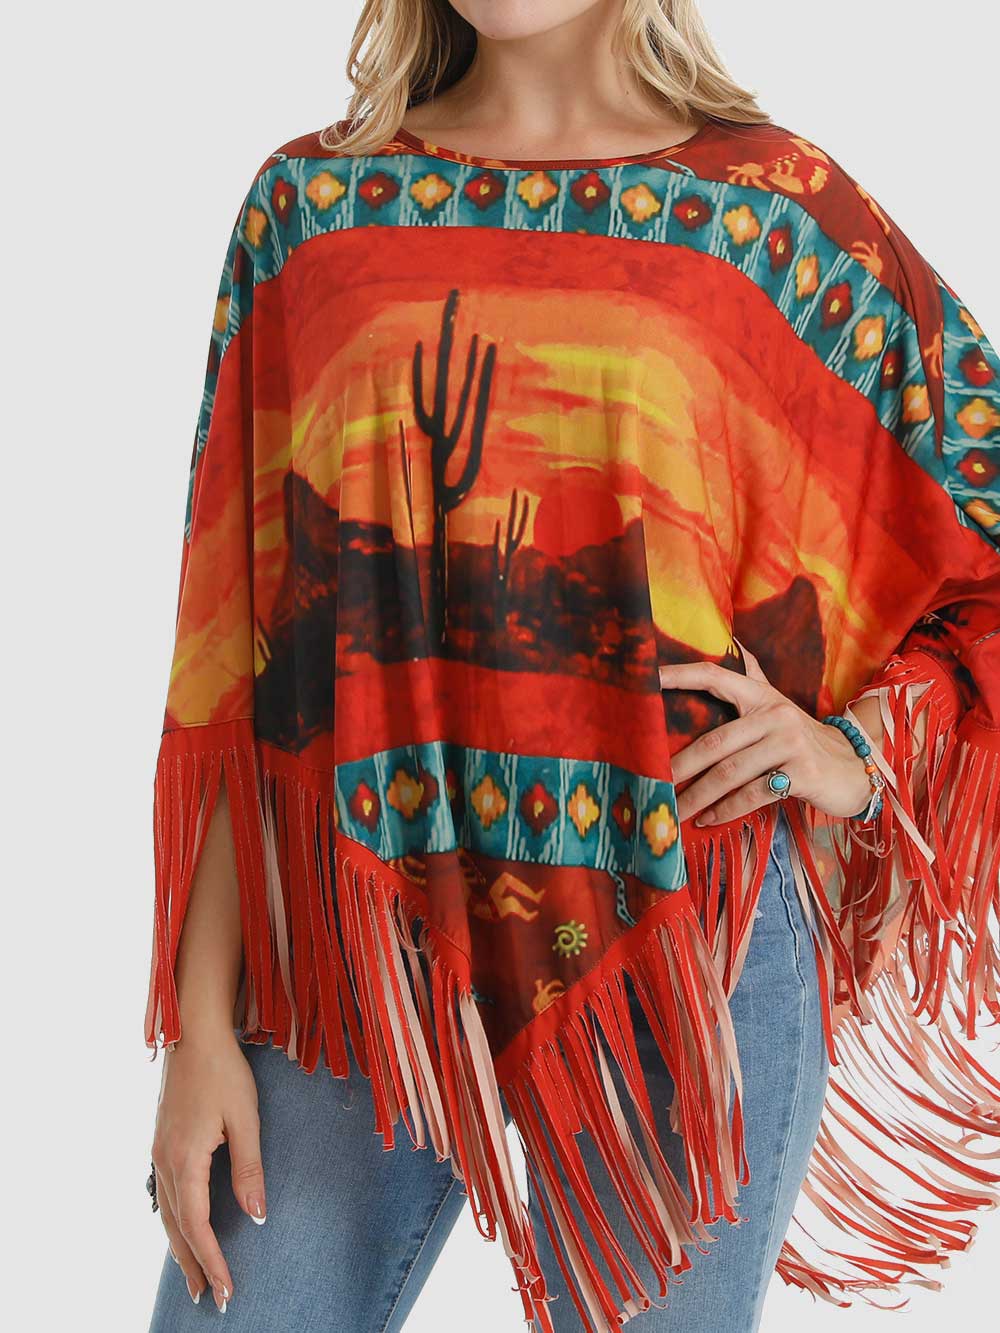 Montana West Desert Graphic Collection Poncho - Cowgirl Wear